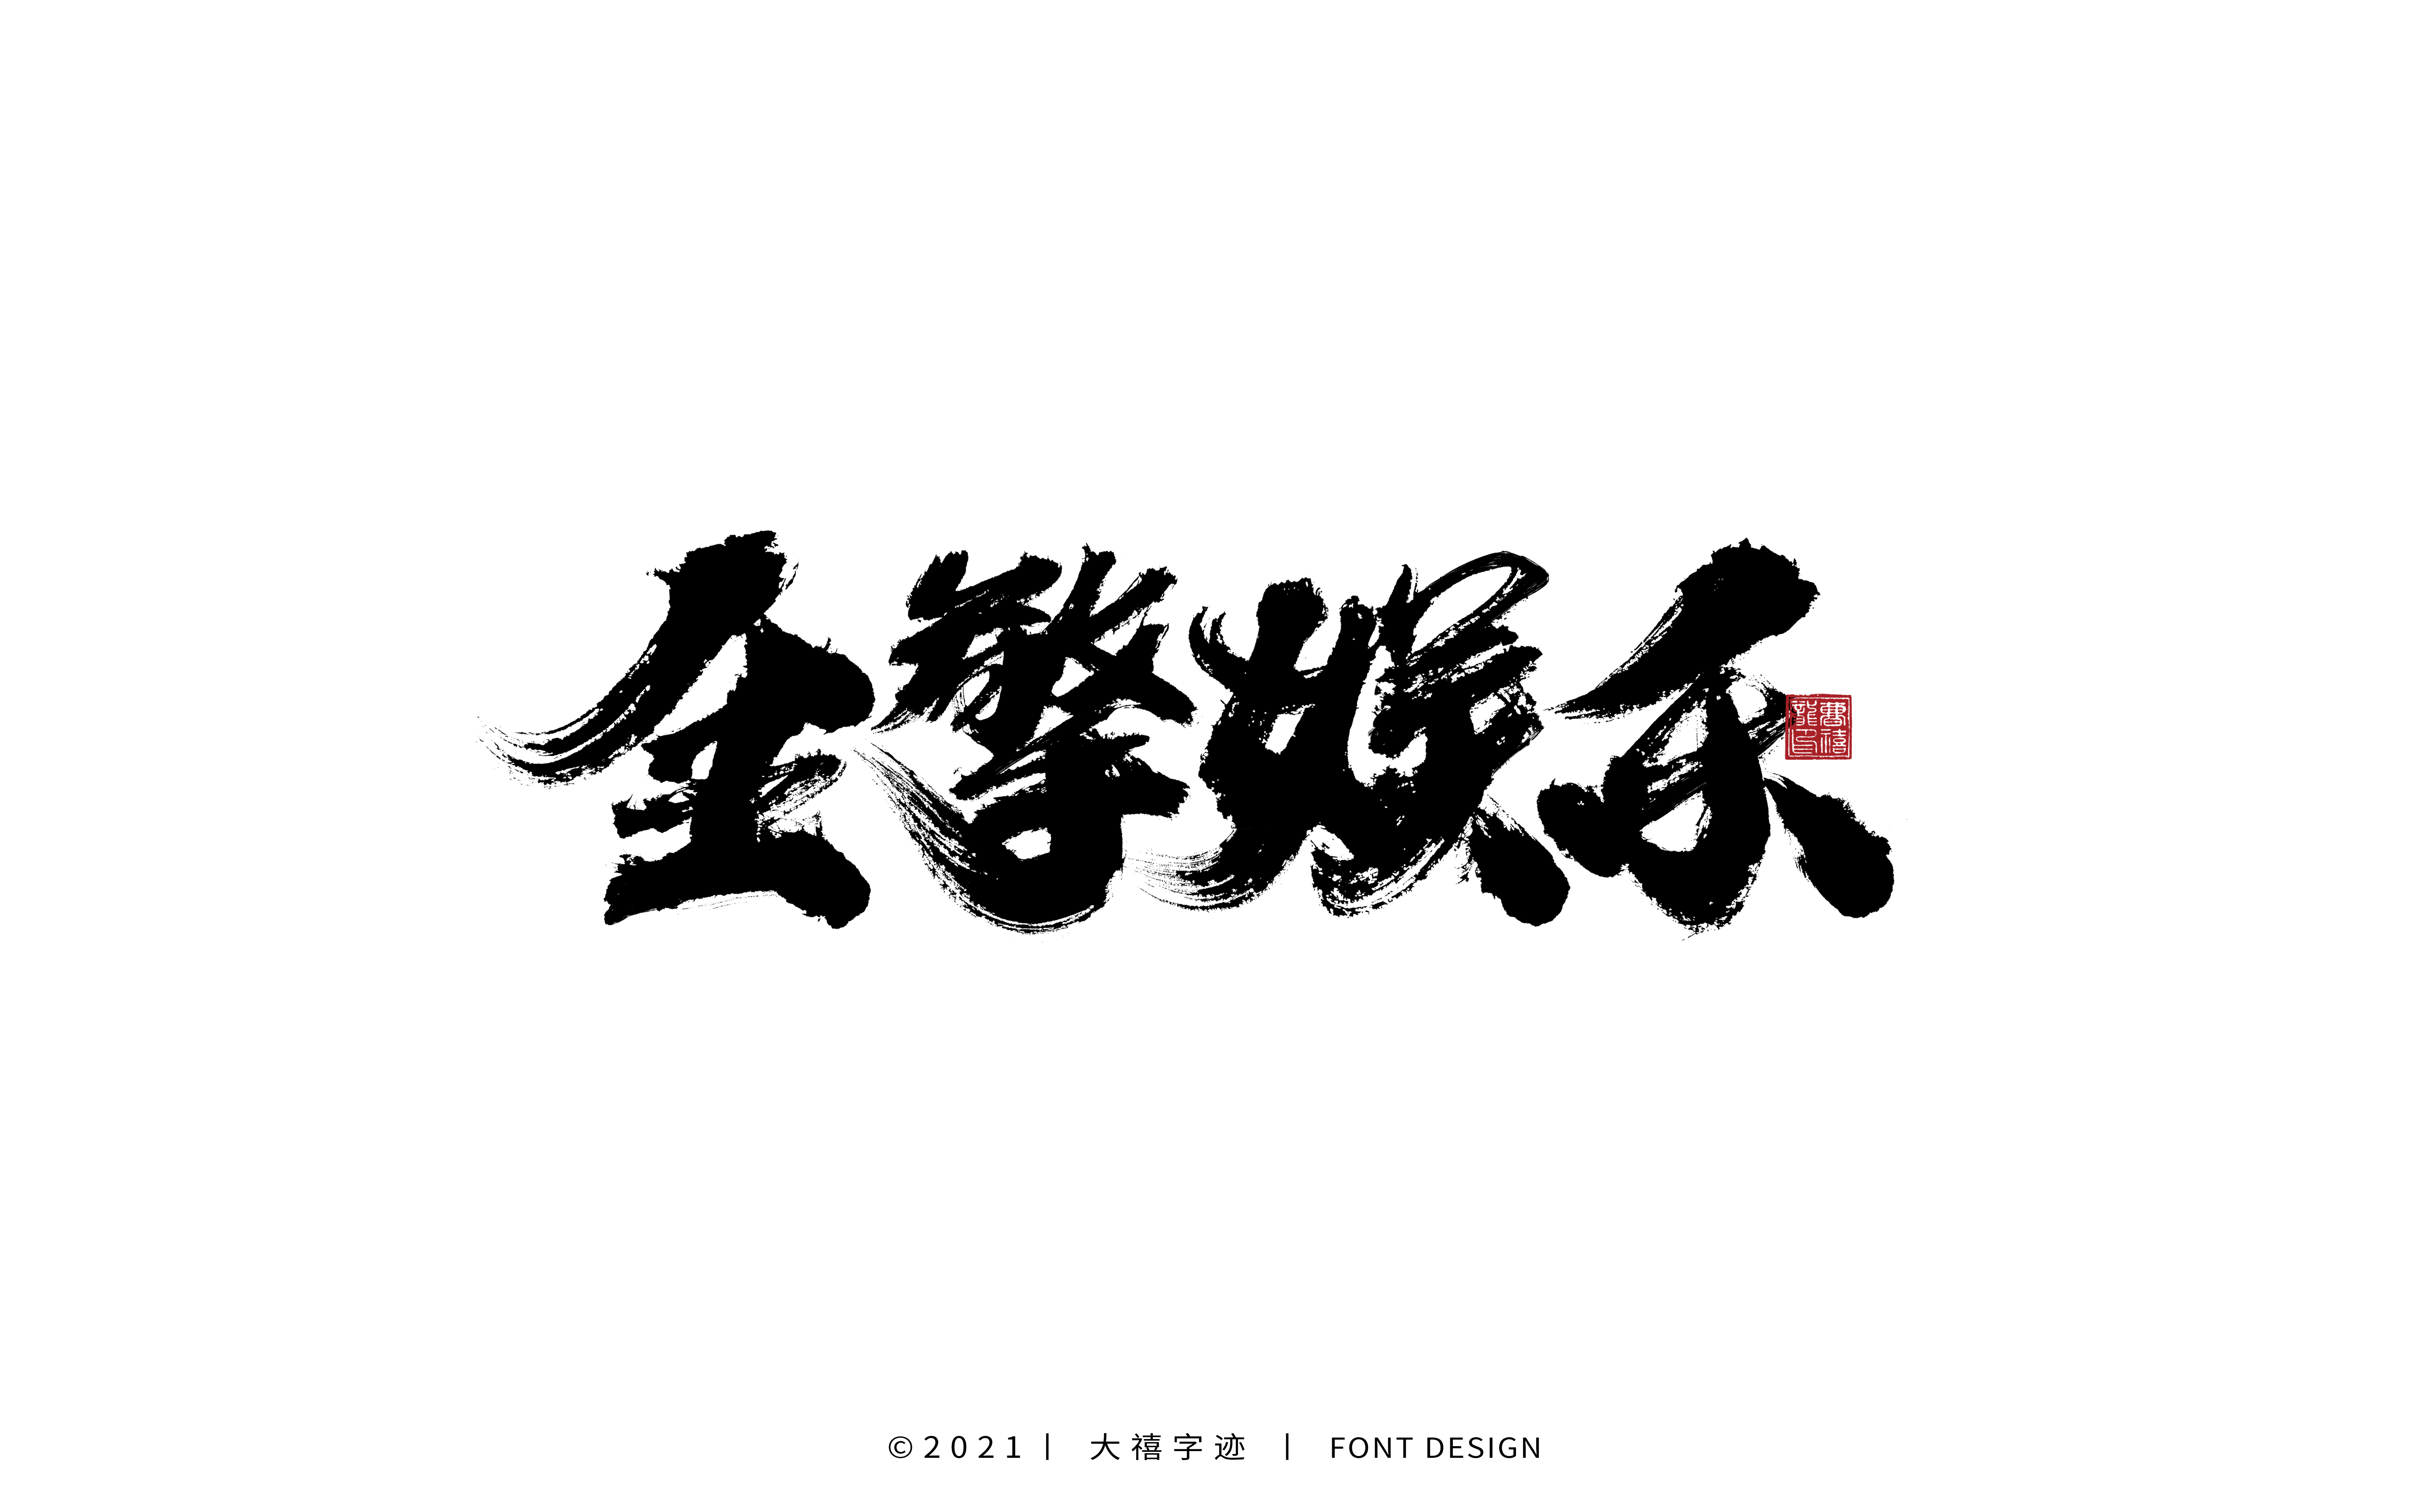 20P Collection of the latest Chinese font design schemes in 2021 #.128